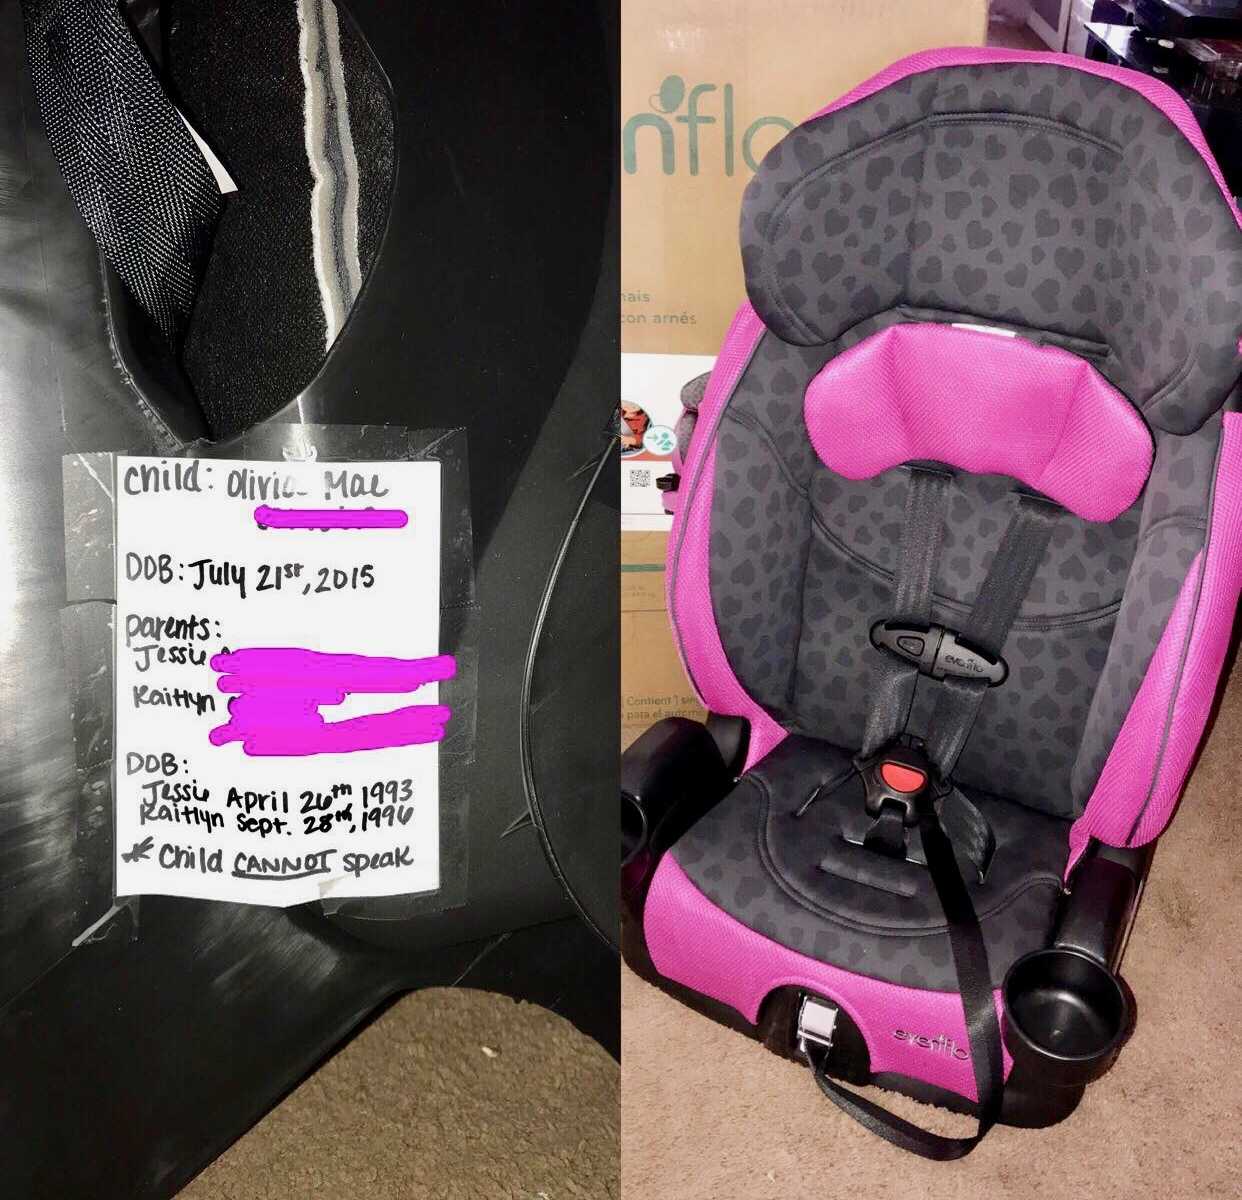 Side by side of car seat label with child’s name, DOB, and parents names next to pink and gray car seat with hearts on it